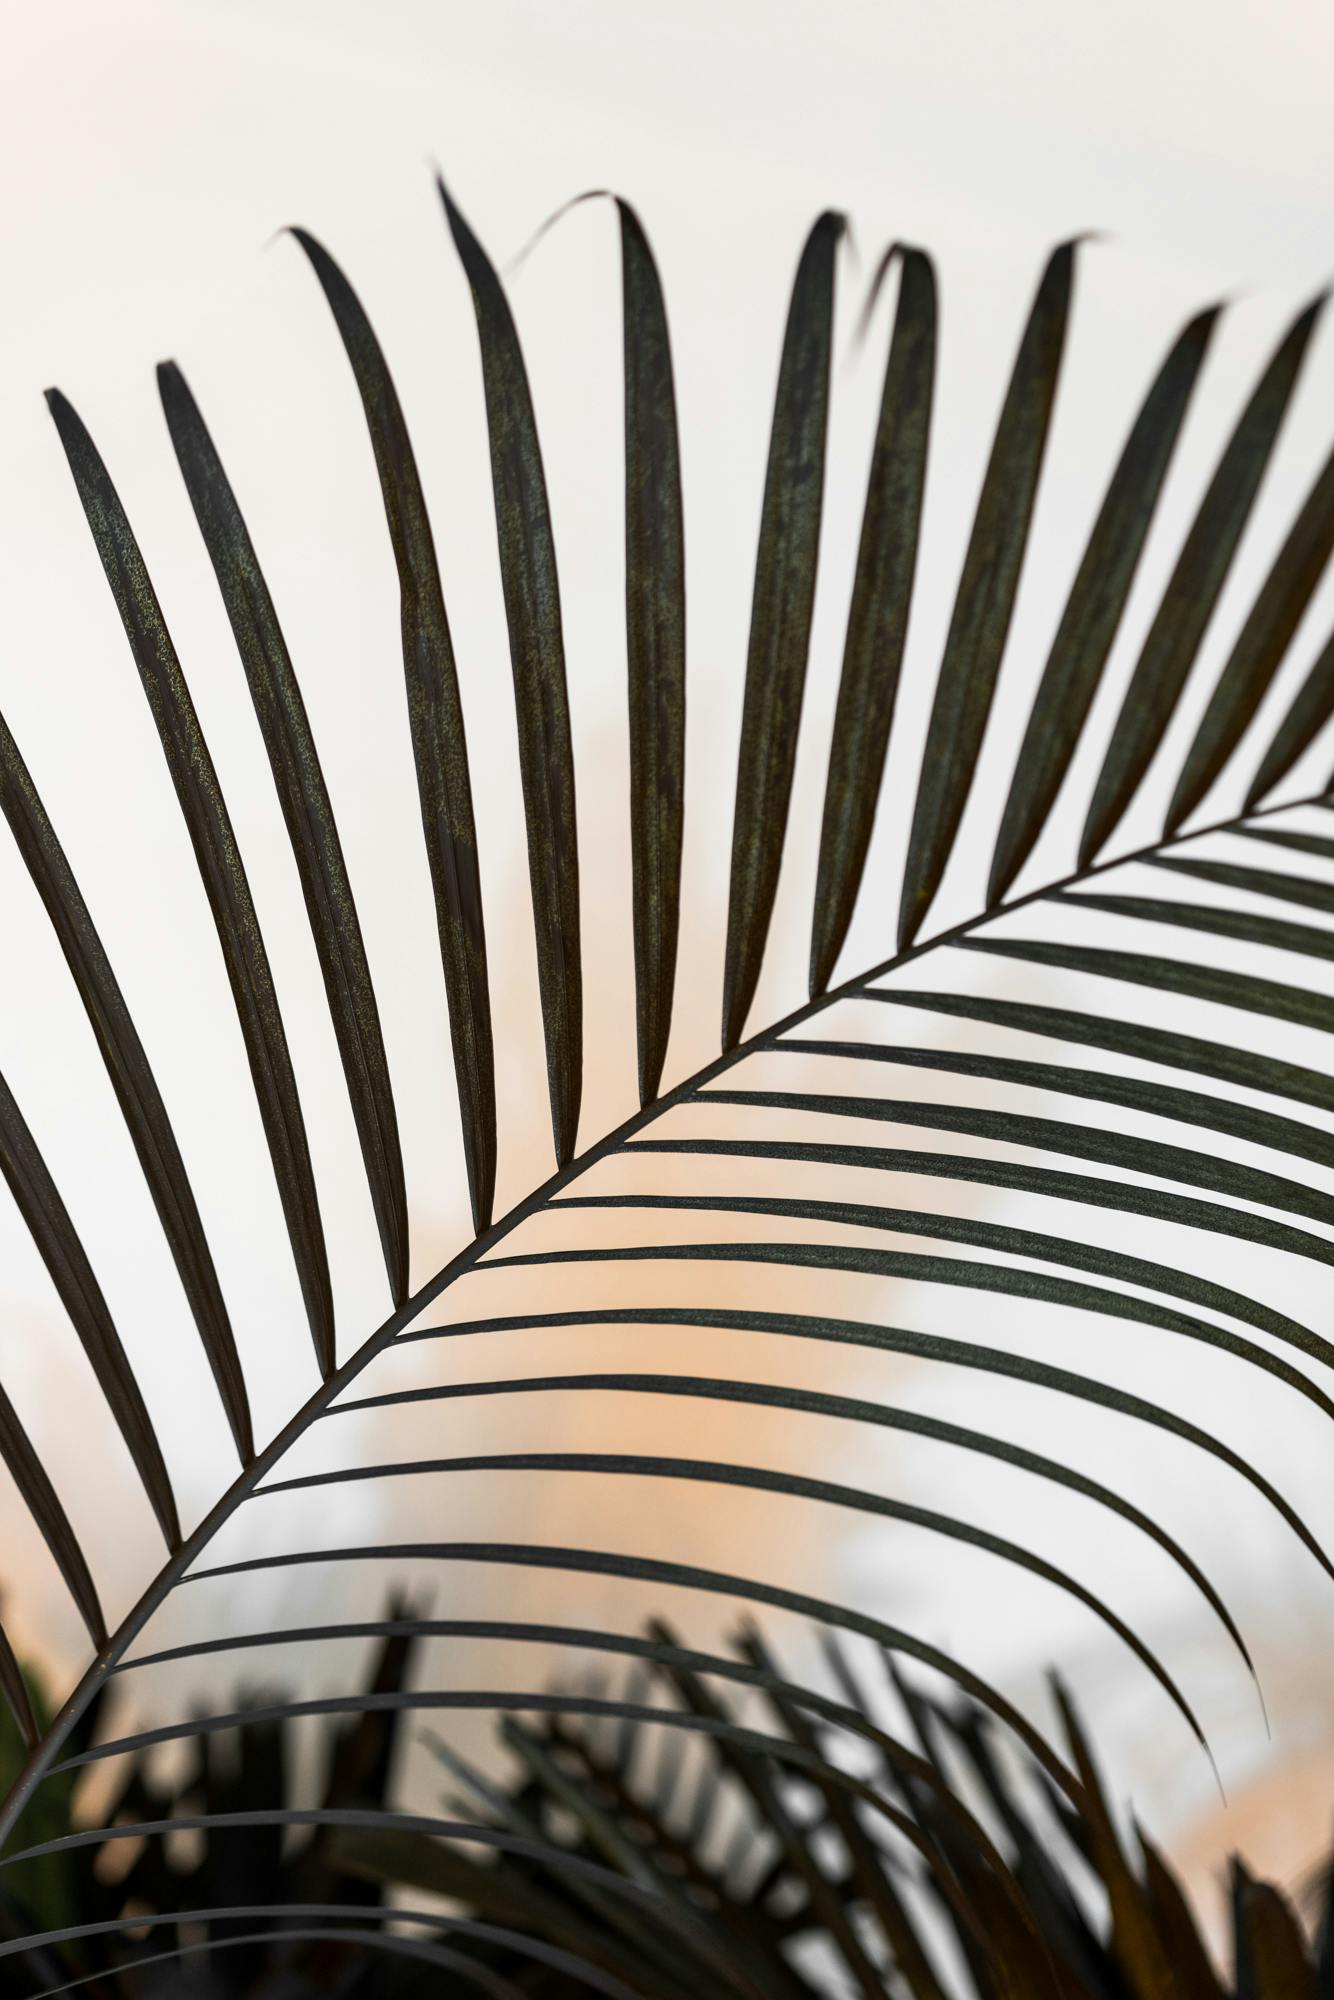 A close view of a palm leaf painted in mat black. A light pink and blue light shines on them casting dynamic shadows on the wall behind them.